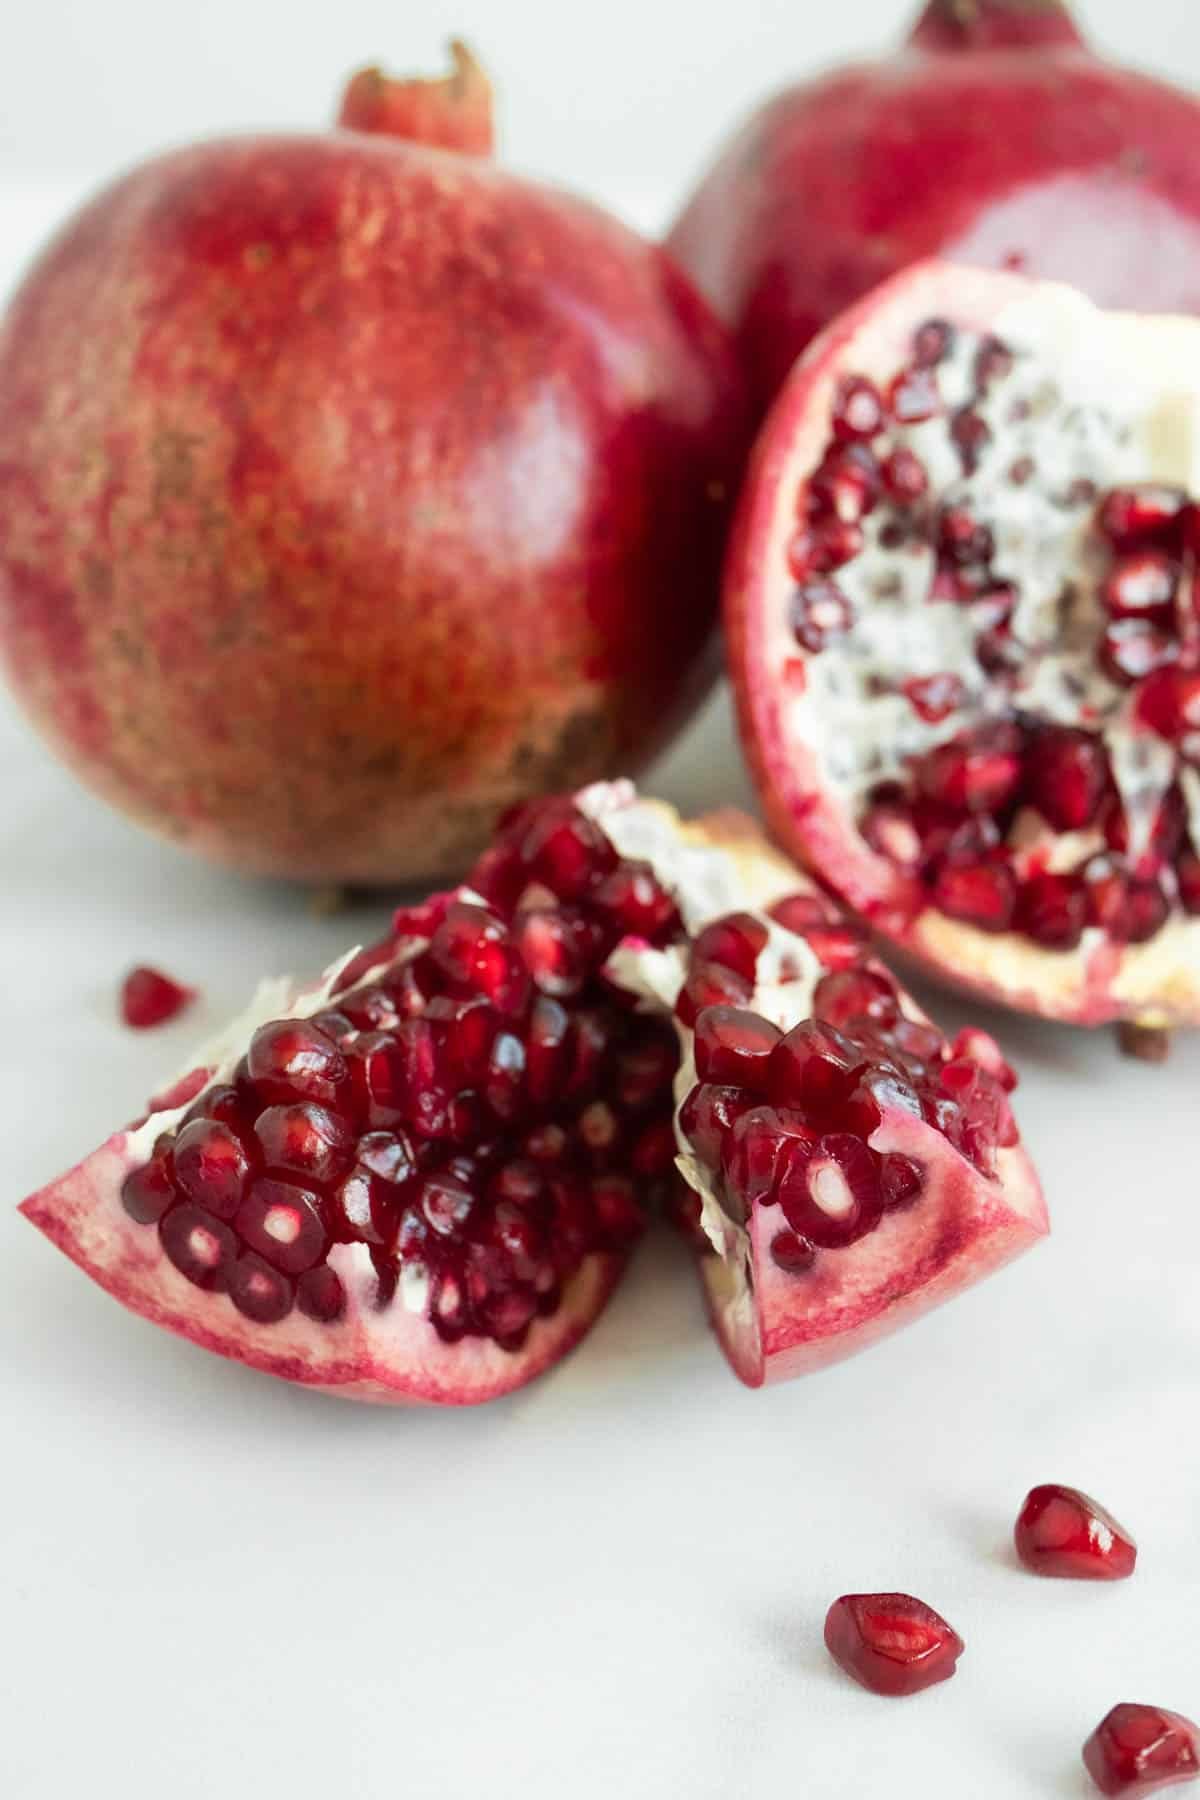 a close up of 3 pomegranates, two whole and one sectioned exposing the inside.